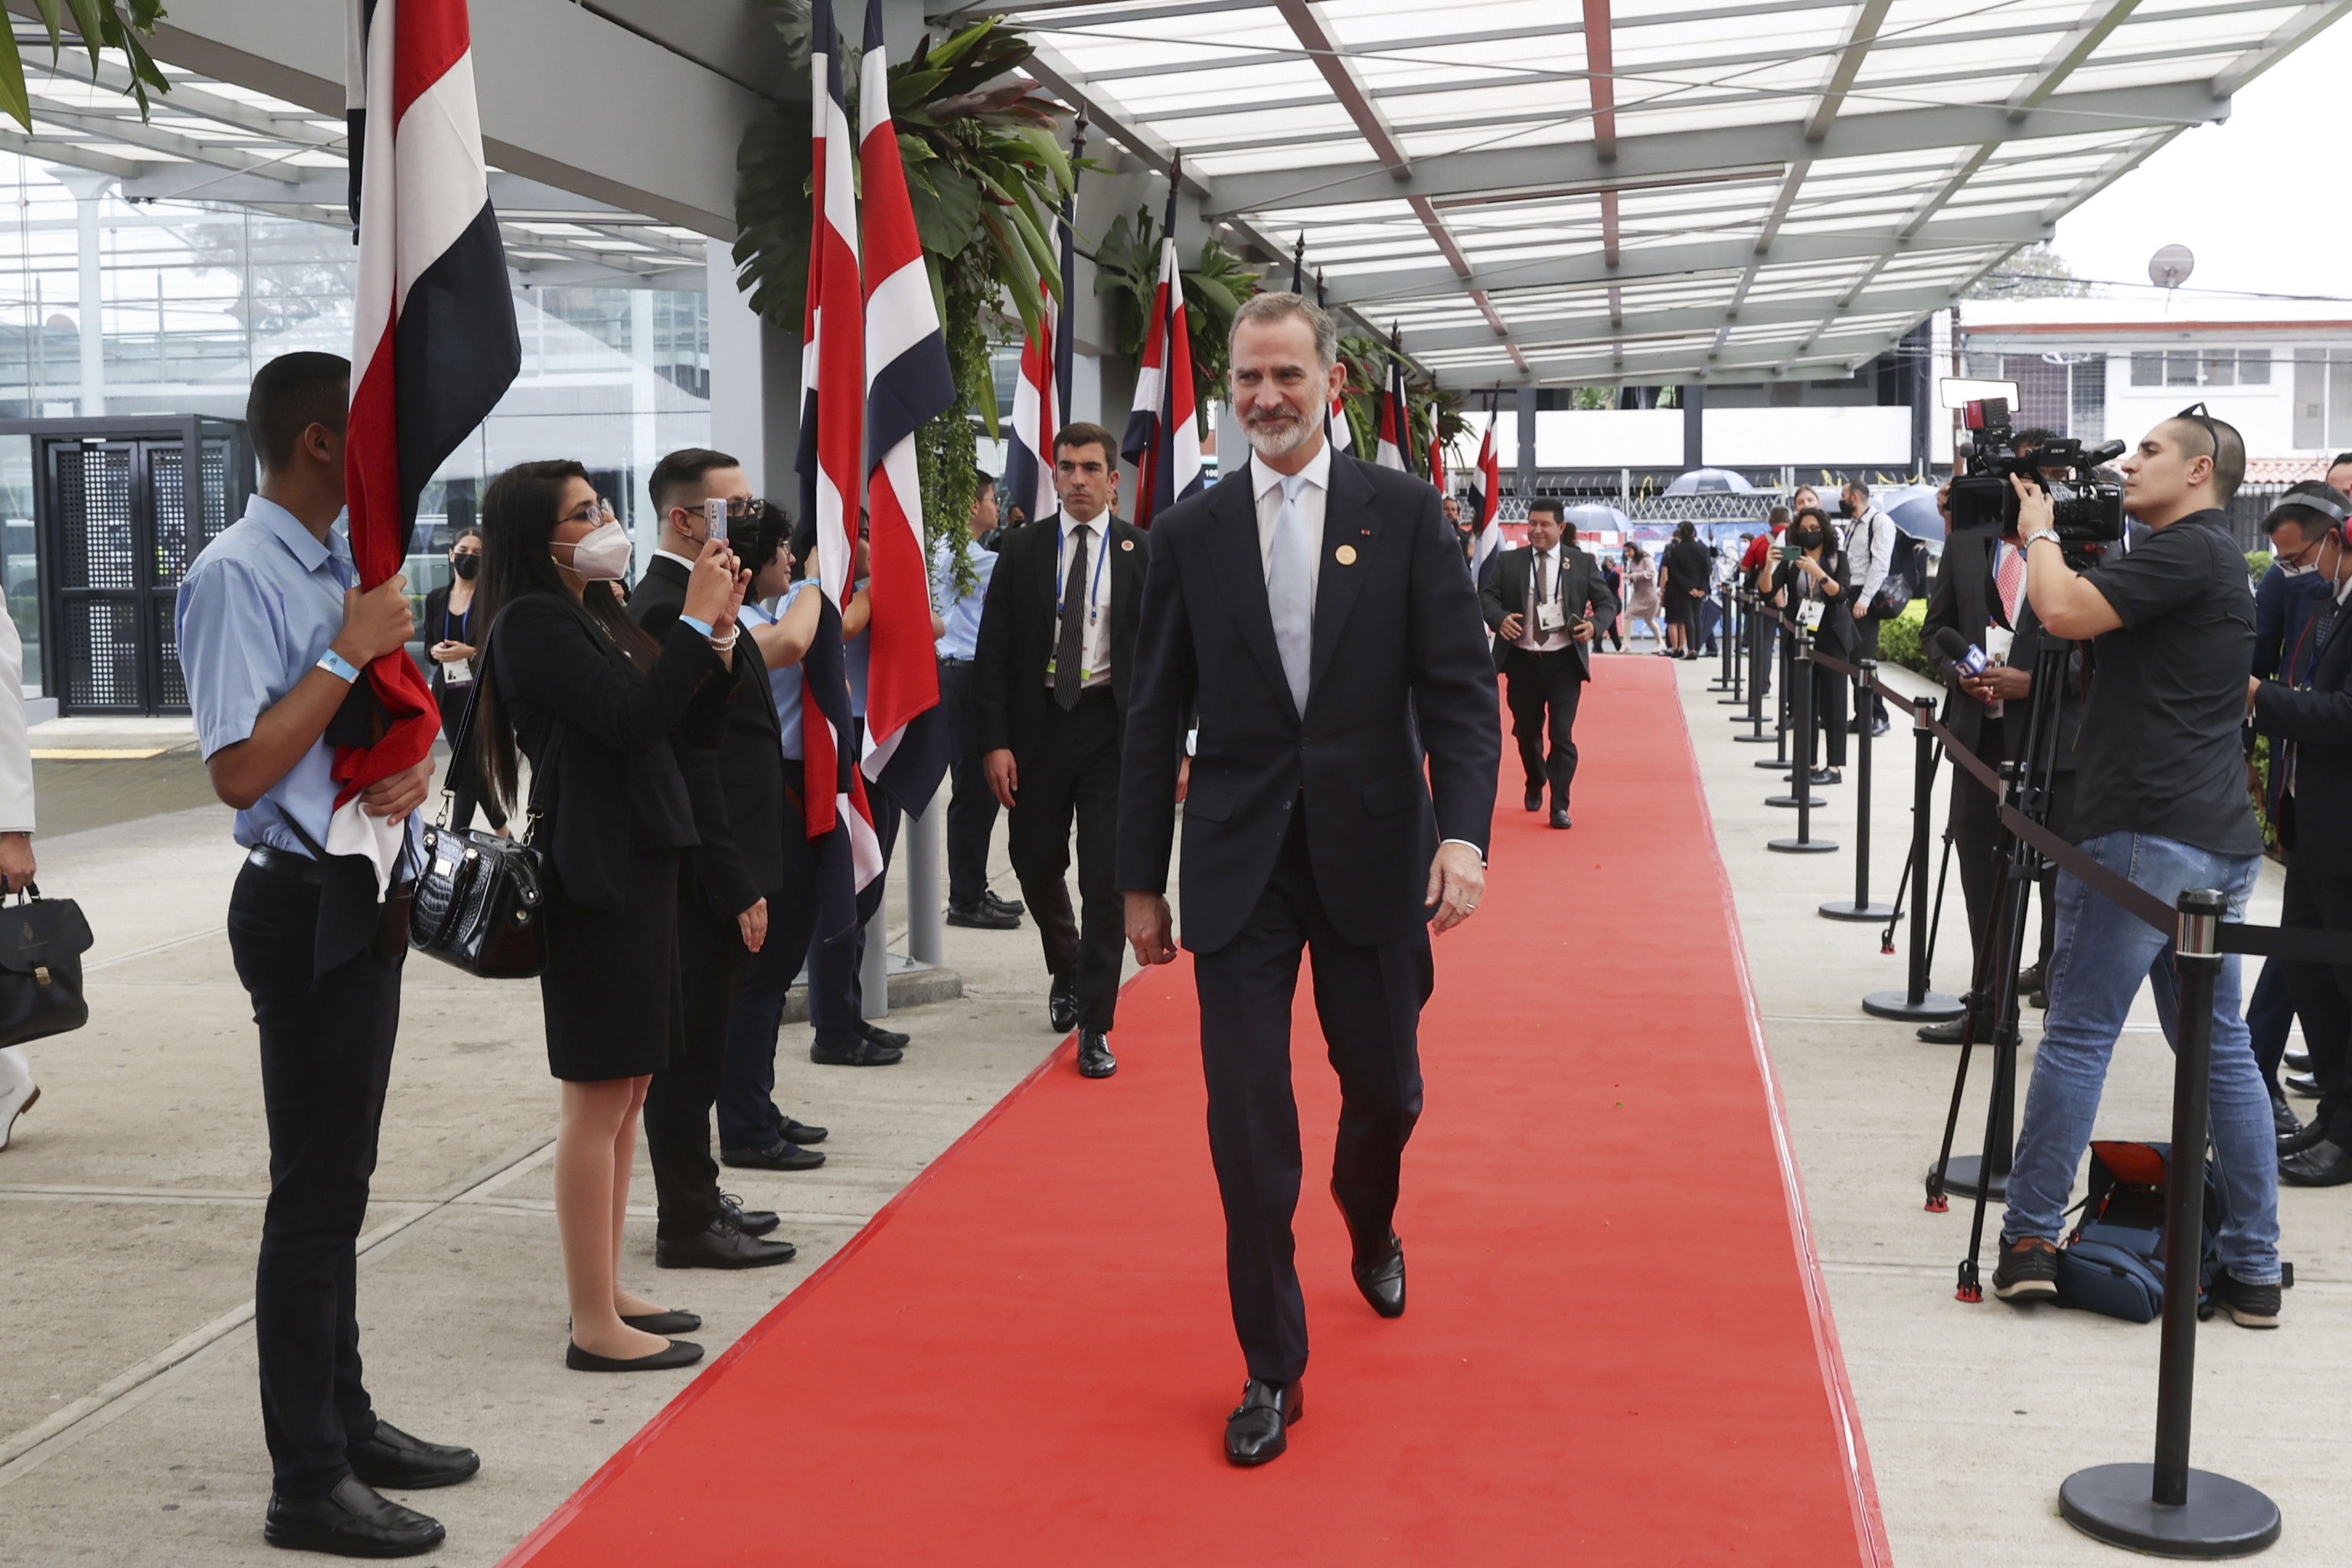 Felipe VI travels to Abu Dhabi, although he is not matched with Don Juan Carlos